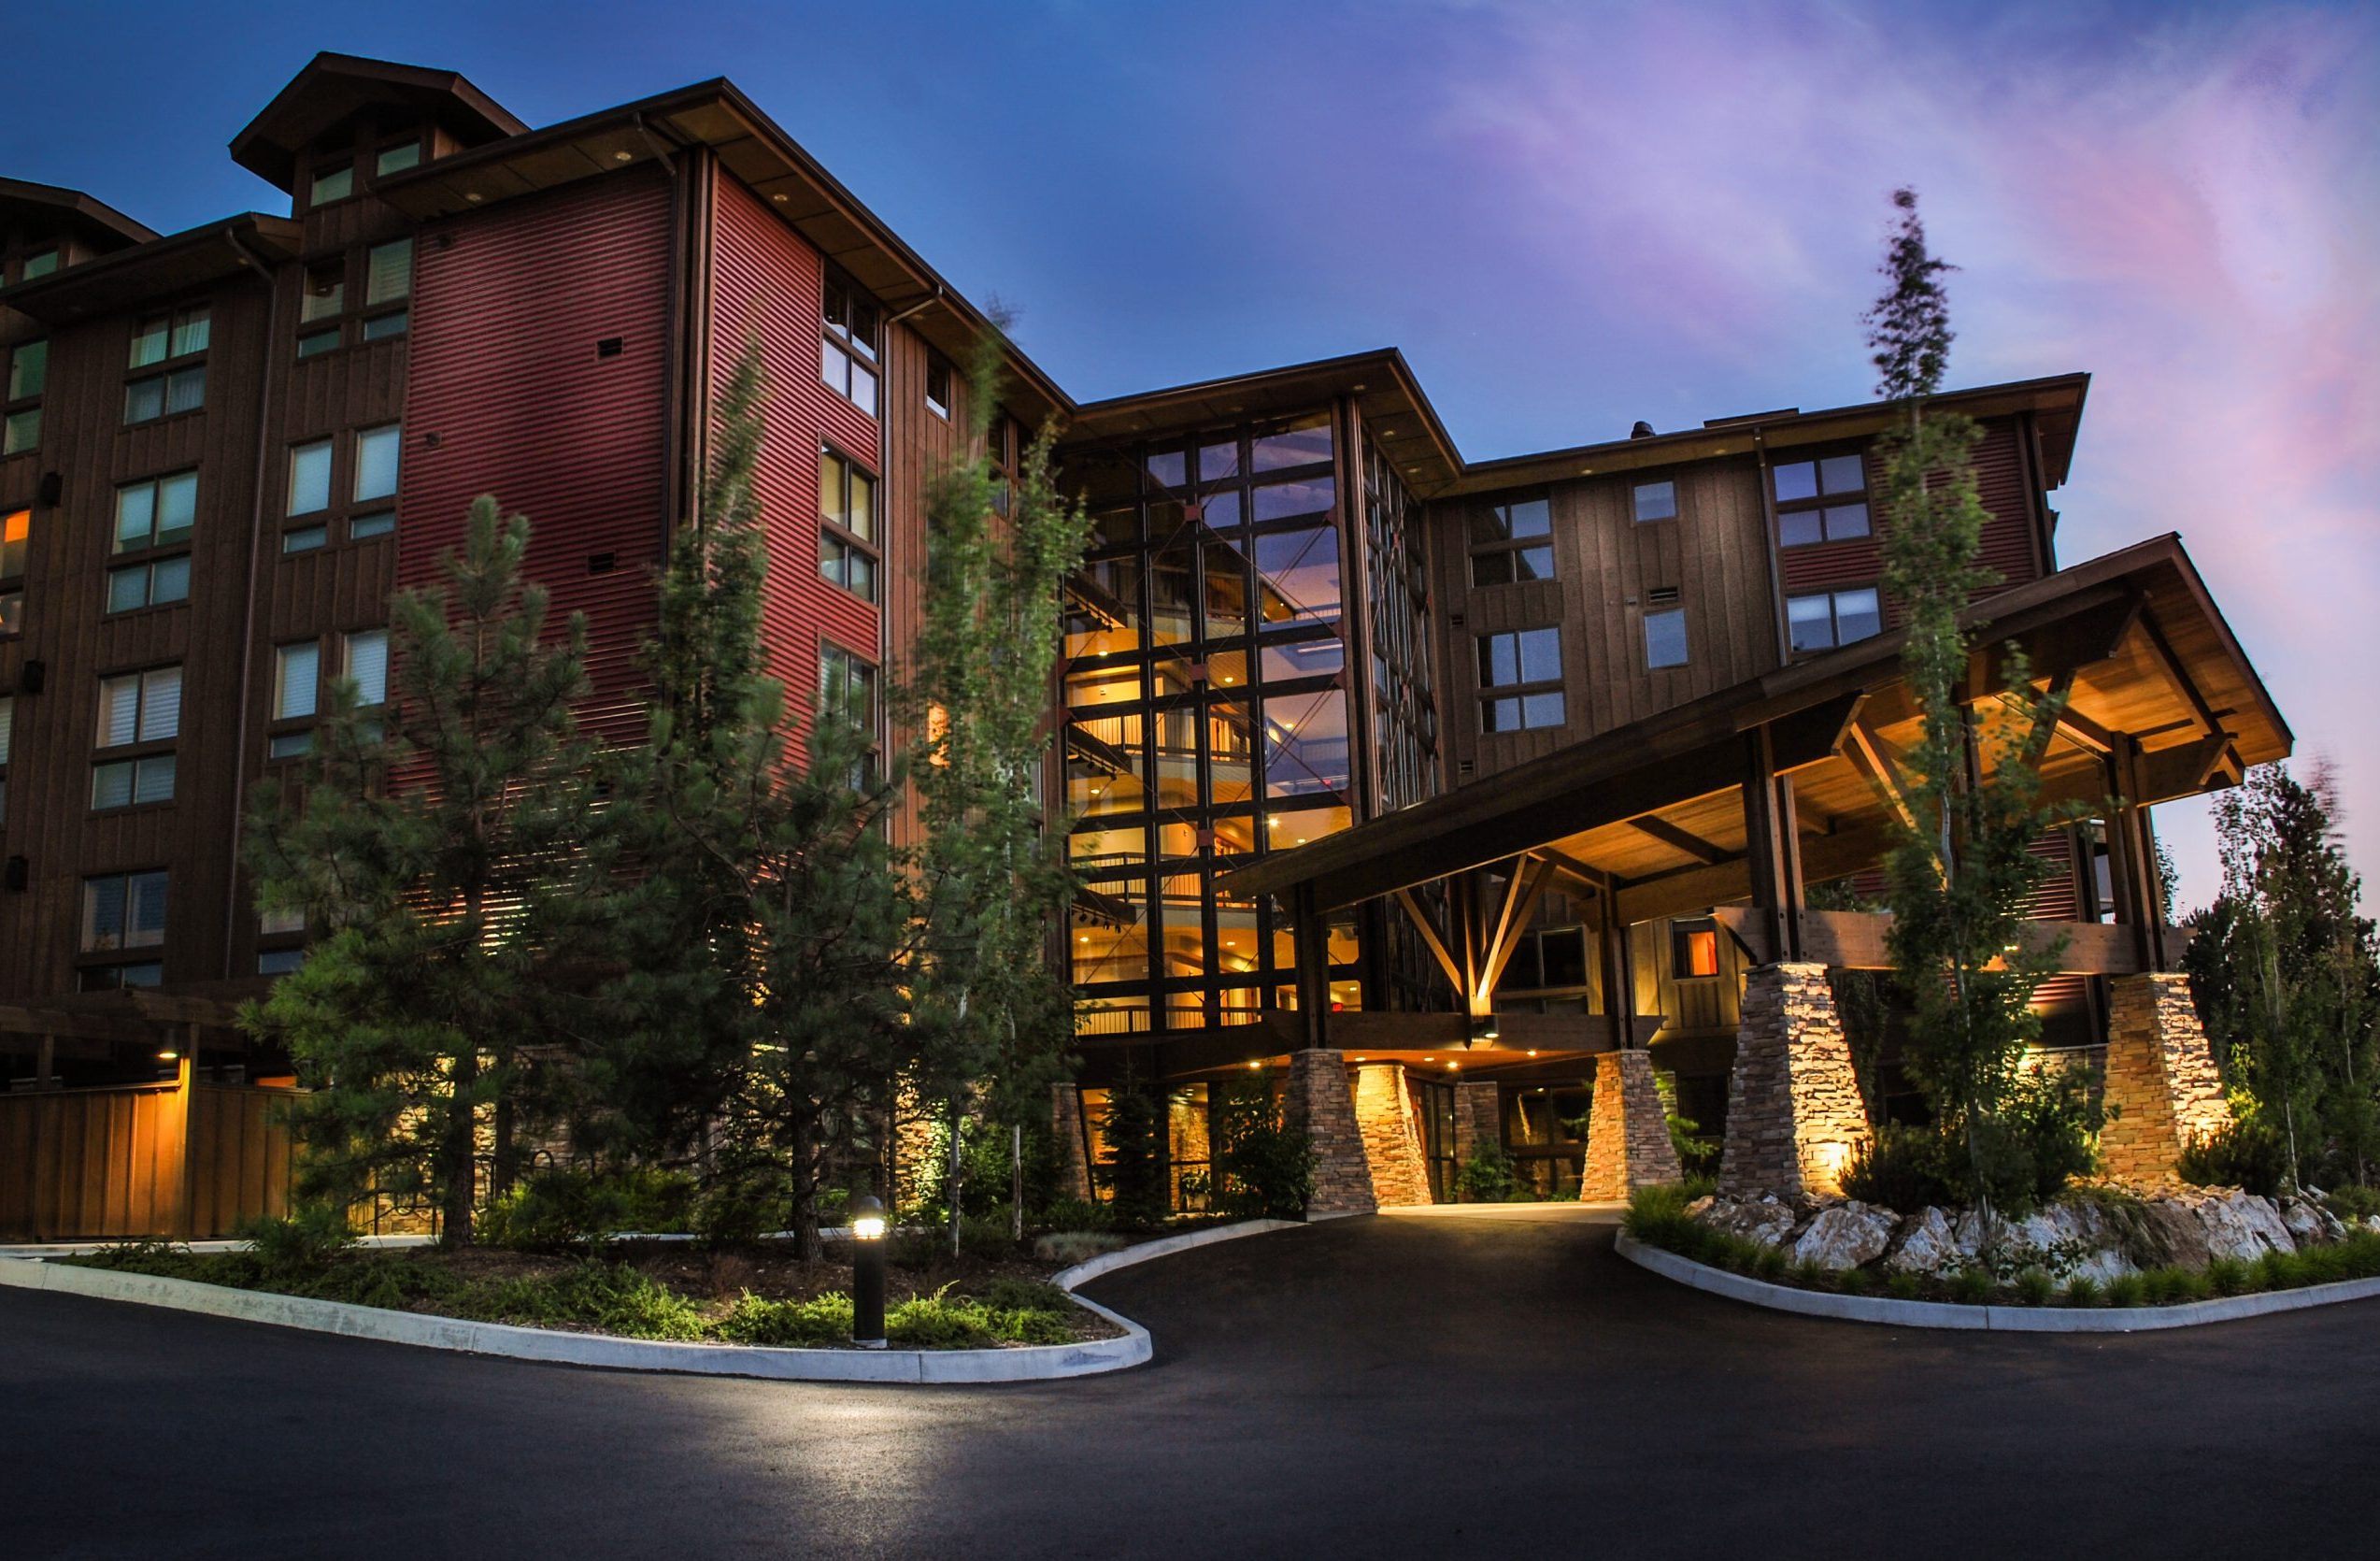 Ridgepointe is a luxury condo project located in the Sanders Beach neighborhood in Coeur d’Alene that features exposed beams, stonework, and a five-story entry atrium.